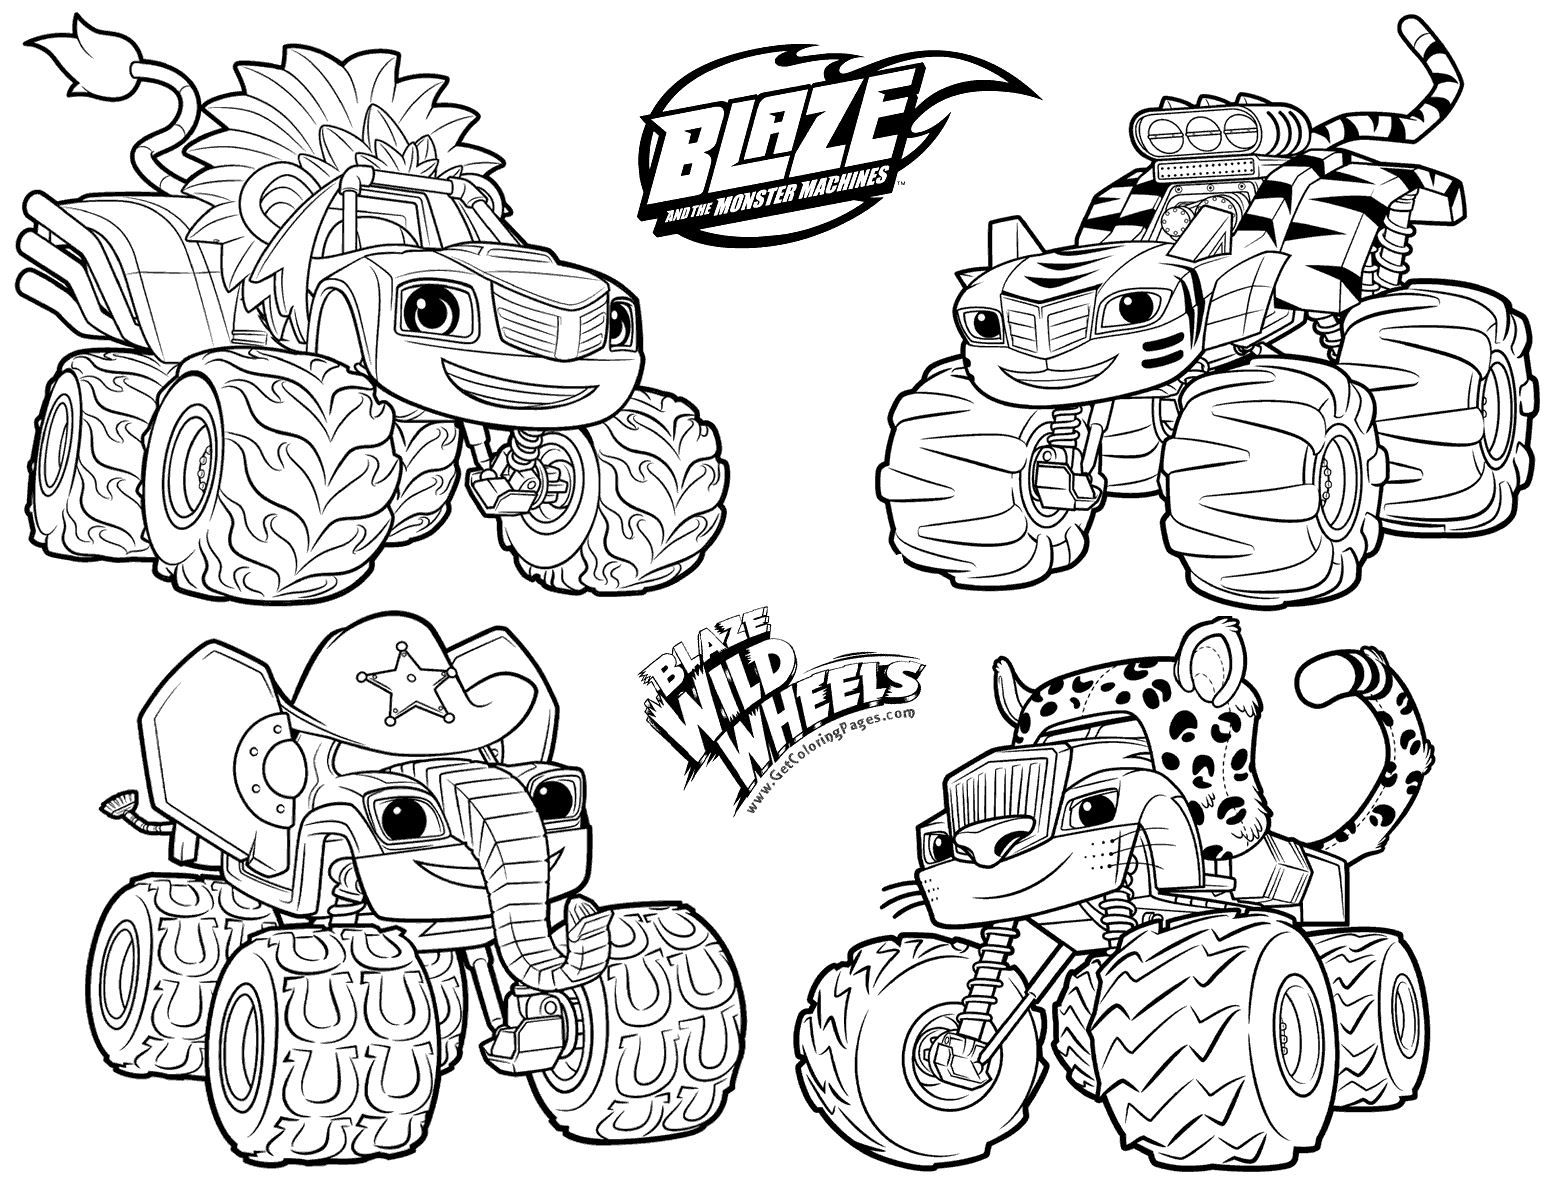 blaze-and-the-monster-machines-printable-coloring-pages-at-getdrawings